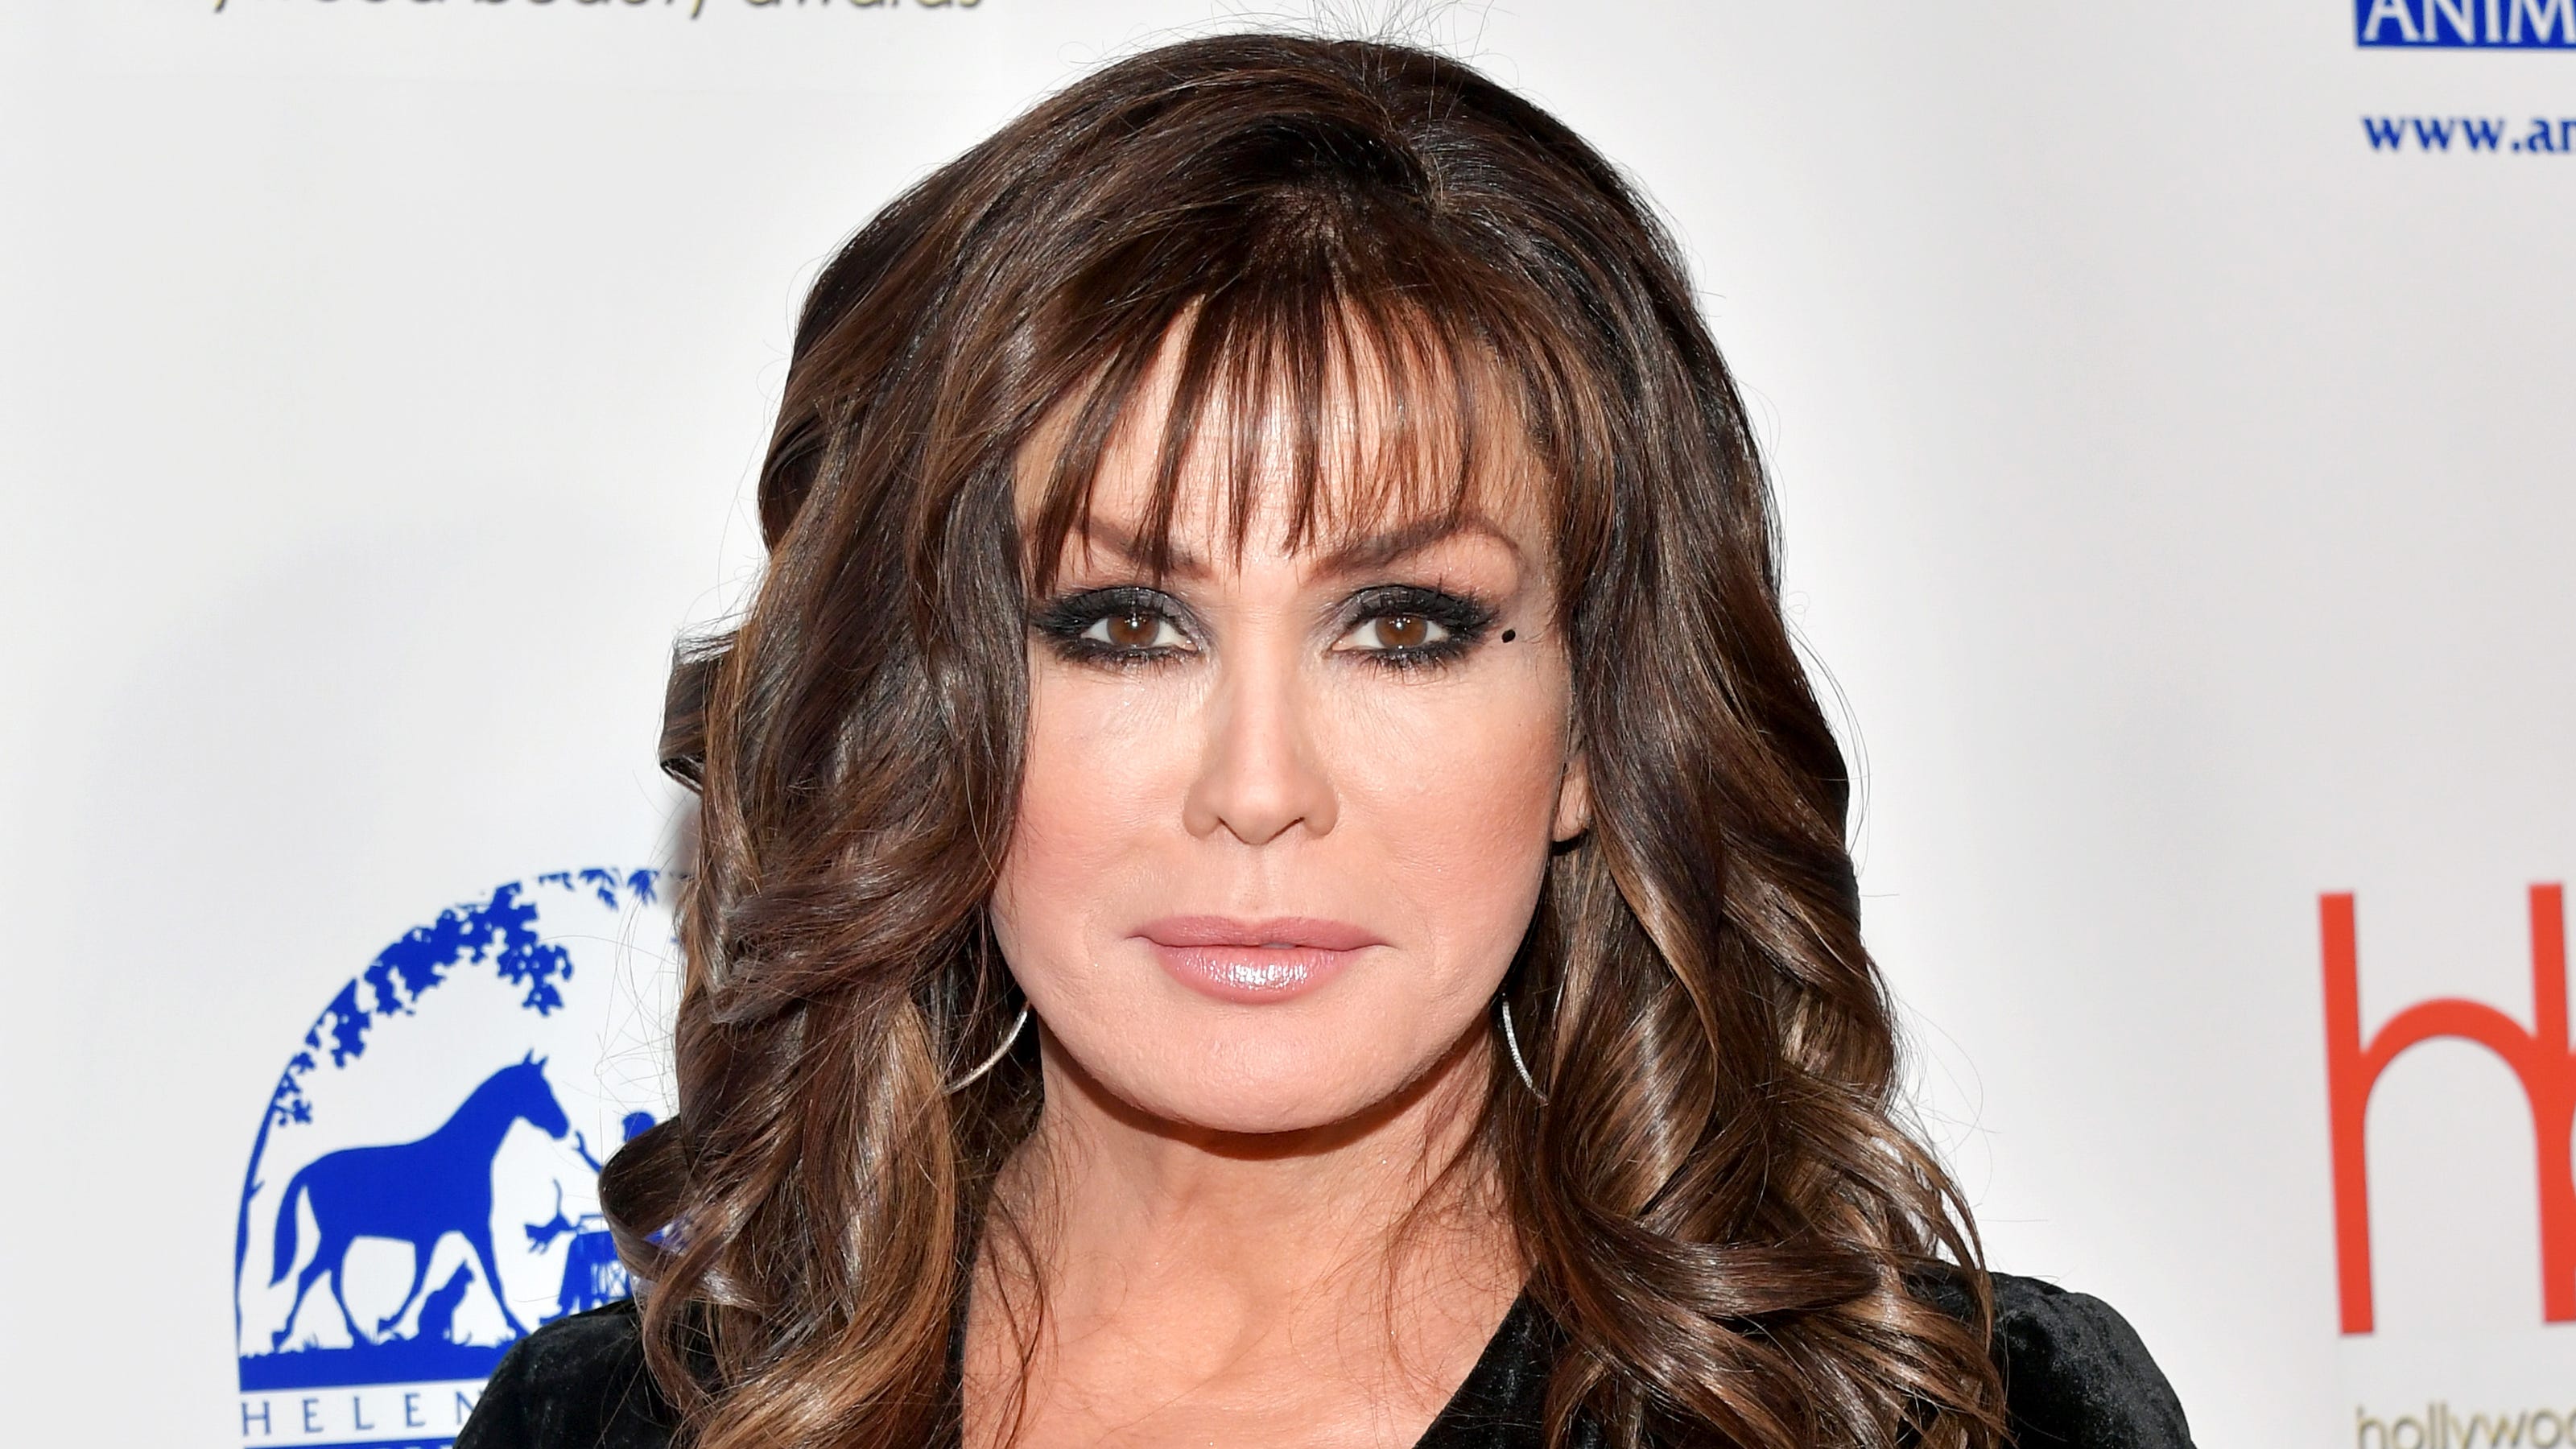 Marie Osmond says late son Michael Blosil was 'bullied very heavily'